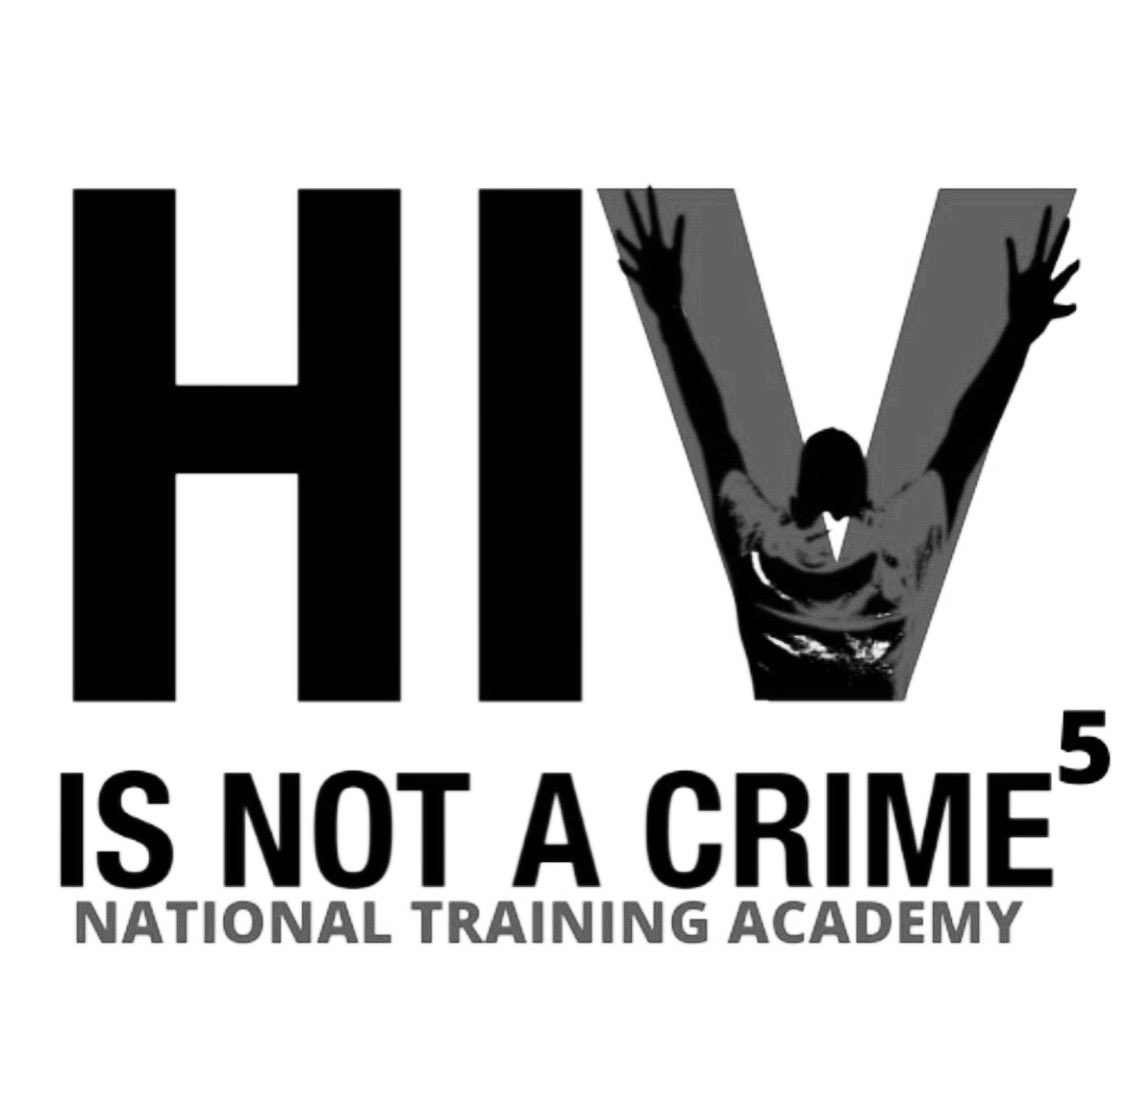 #OrganizationalTuesday! Today we are featuring @hivlawandpolicy. #DisasterPrepardness is crucial for individuals with #HIV. Access to medication, a strong network and education on emergency planning are vital. Head to their page to learn more.  #HIVAdvocates